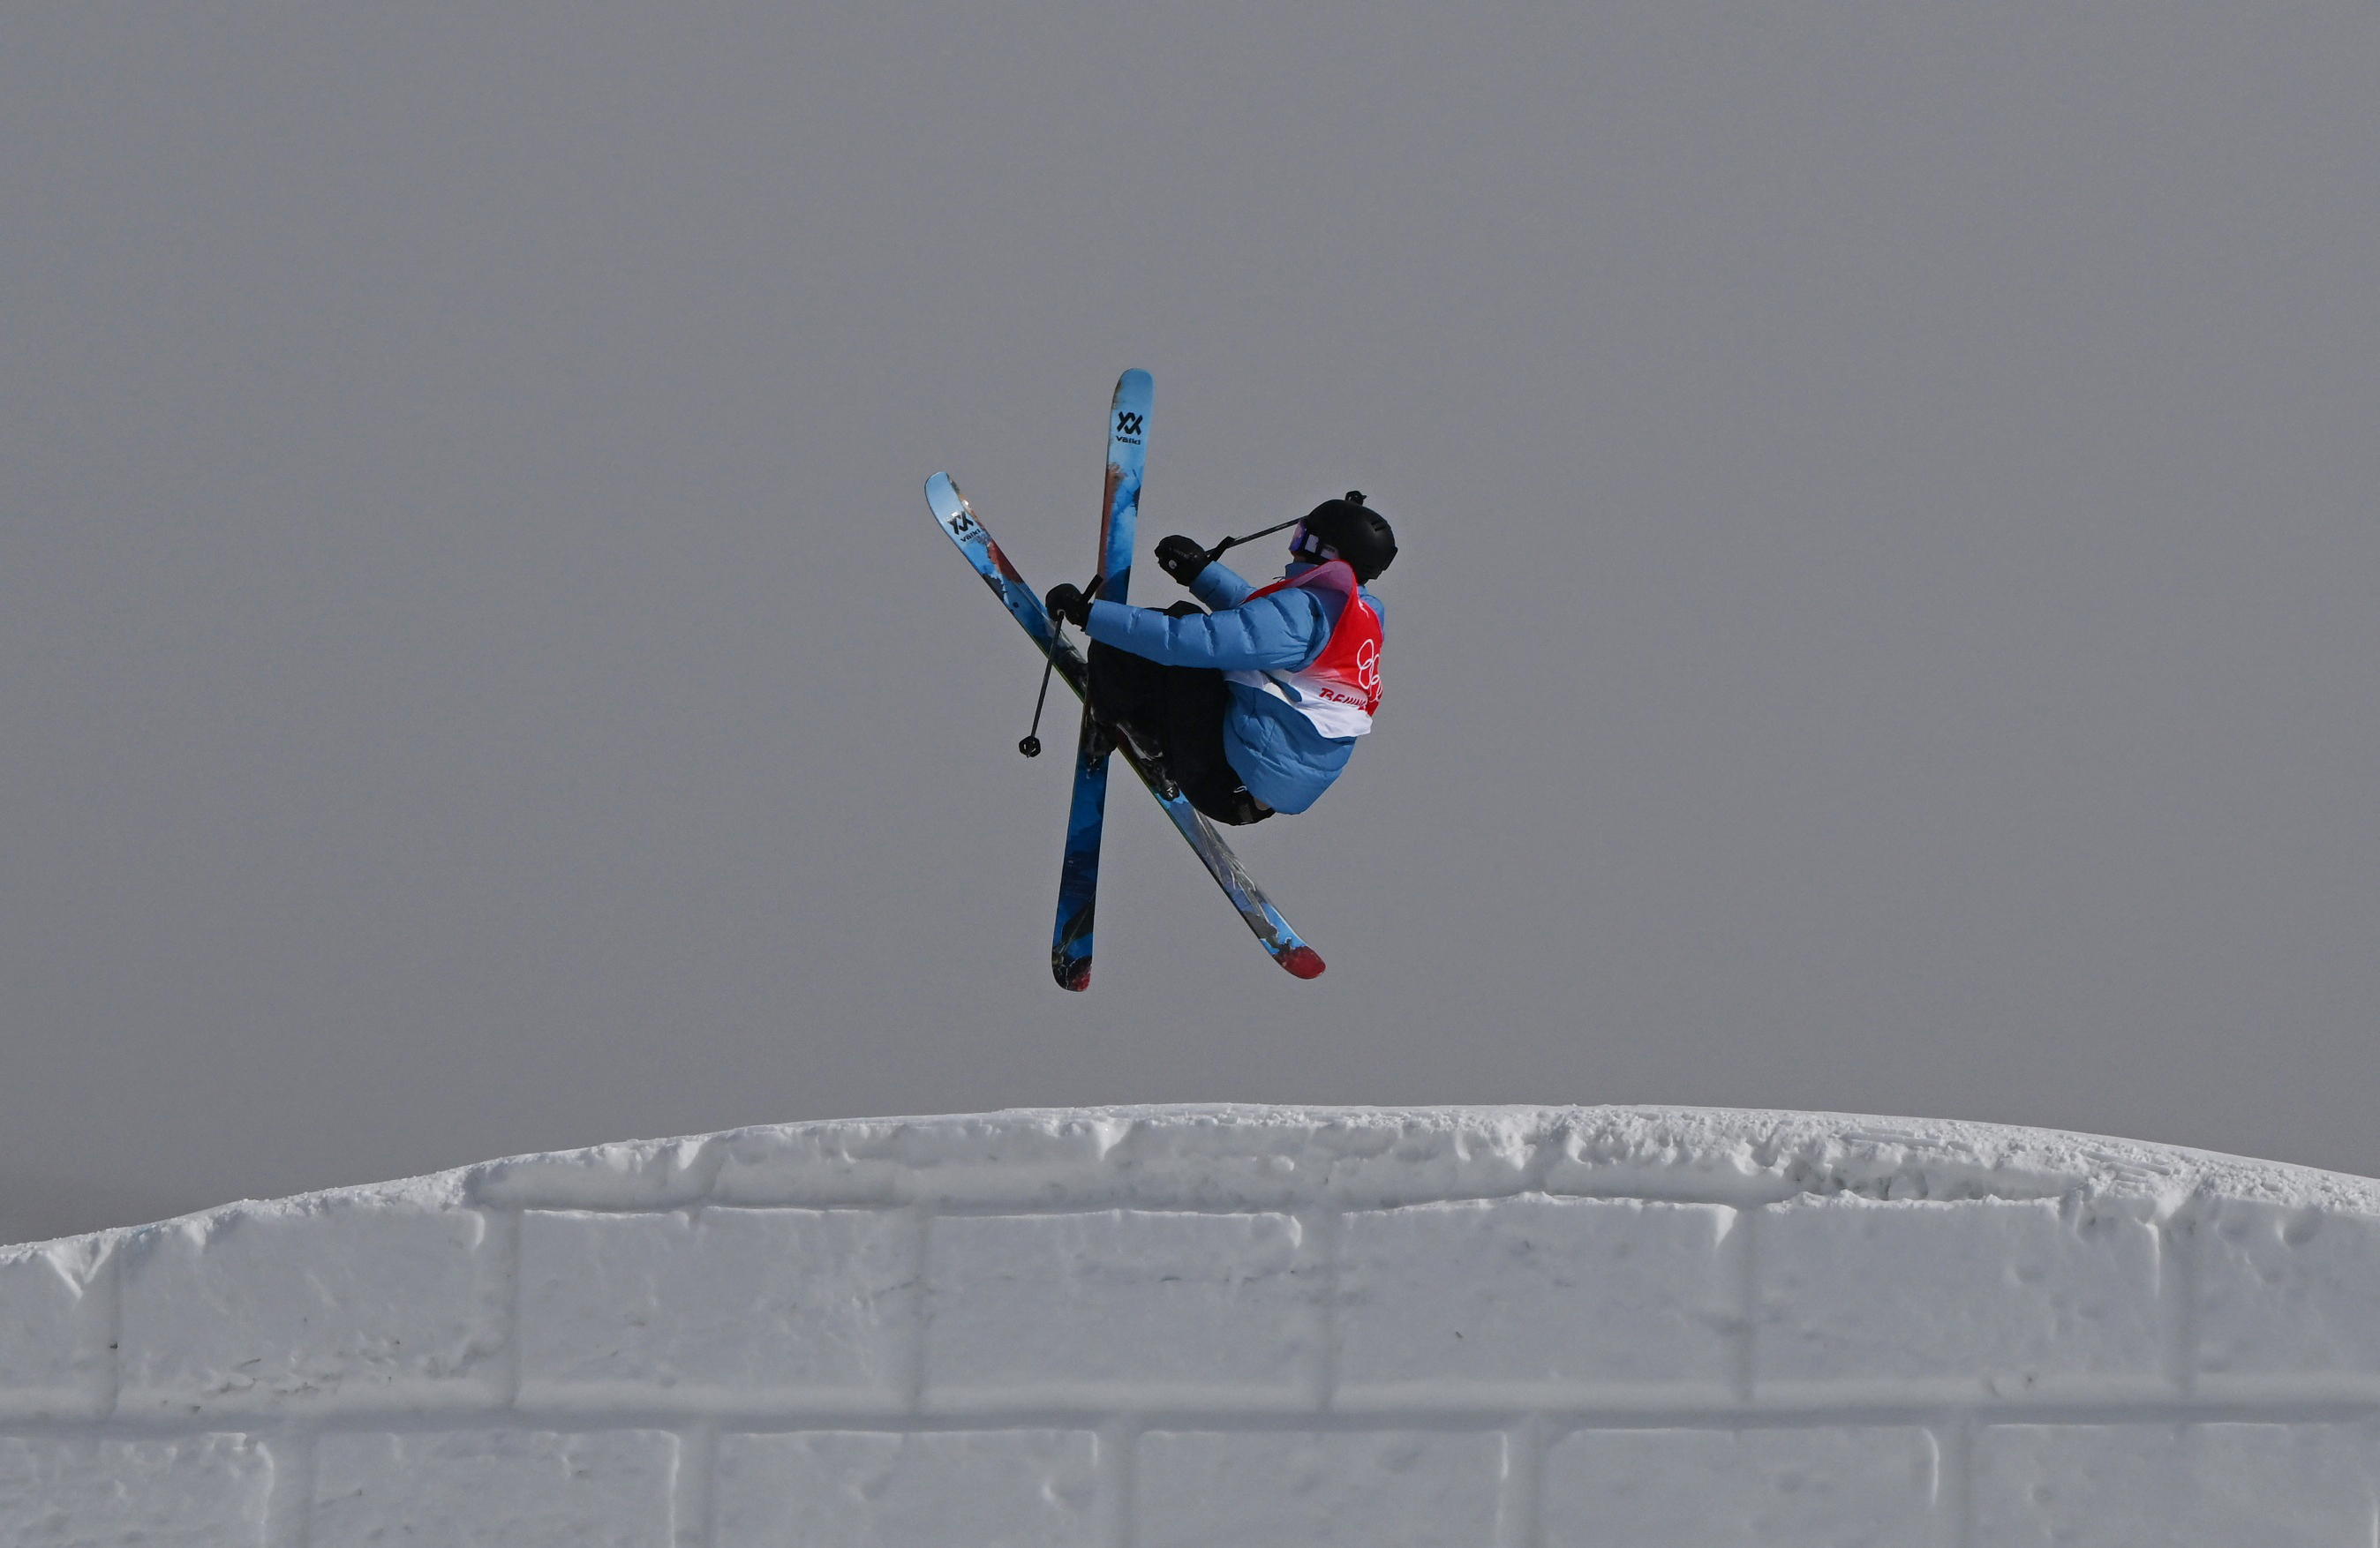 Slopestyle skiers aren't fazed by falling pants - NBC Sports